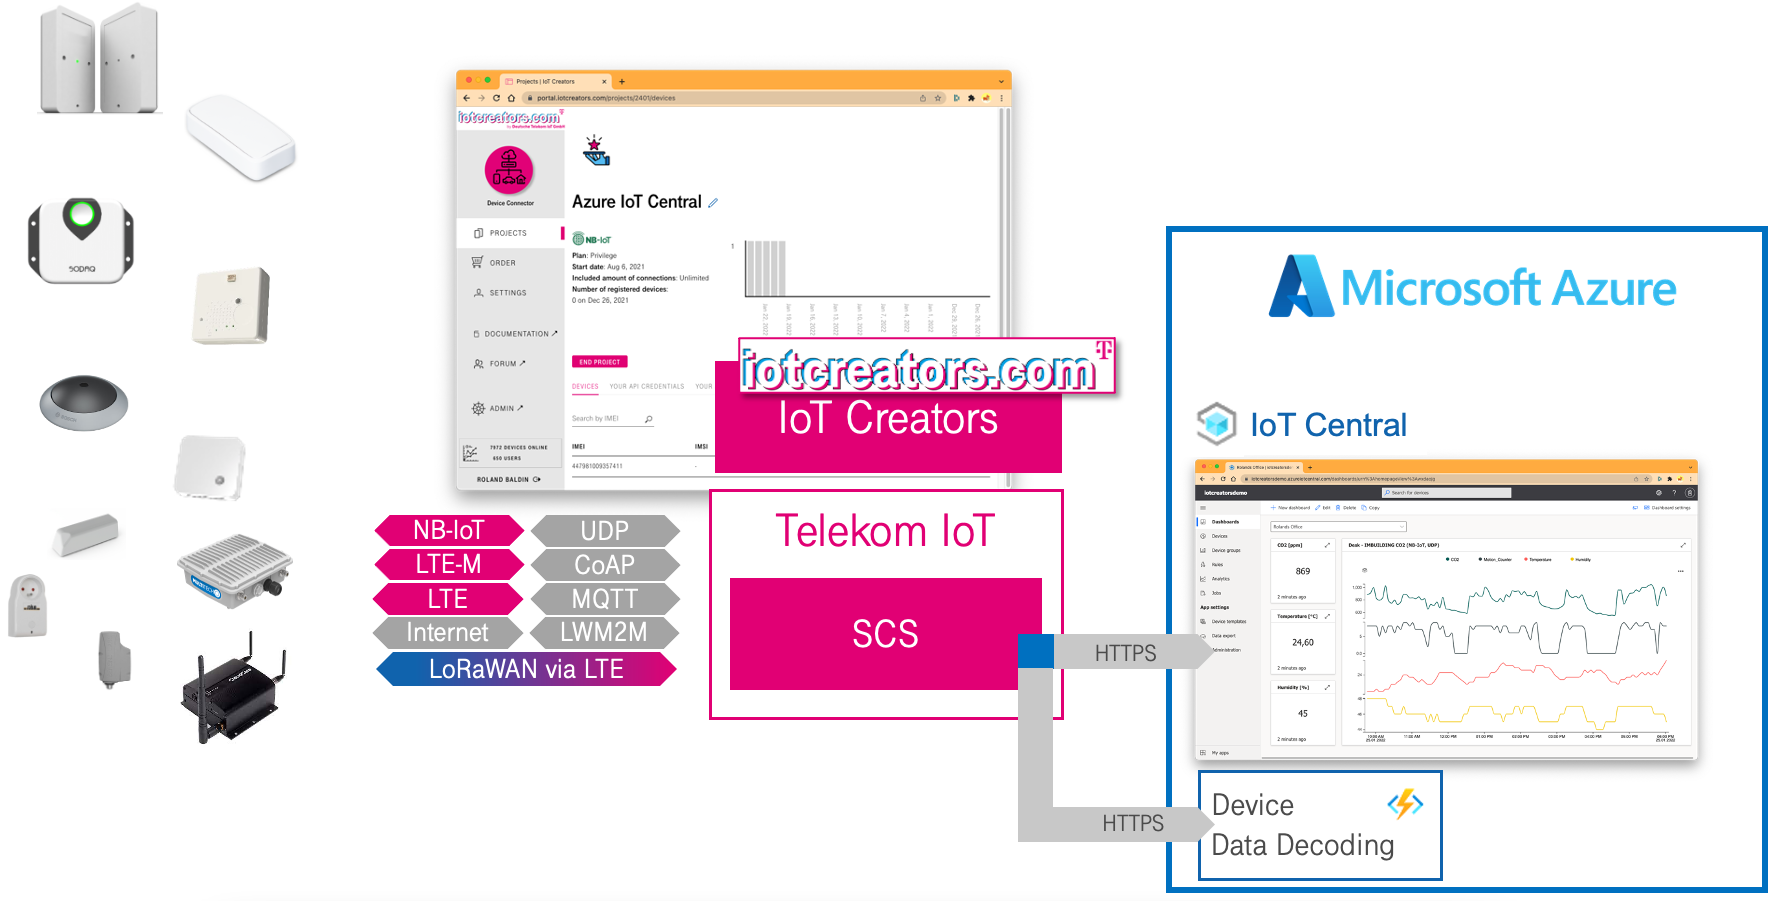 Highlevel architecture of the IoT Creators and Azure IoT Central